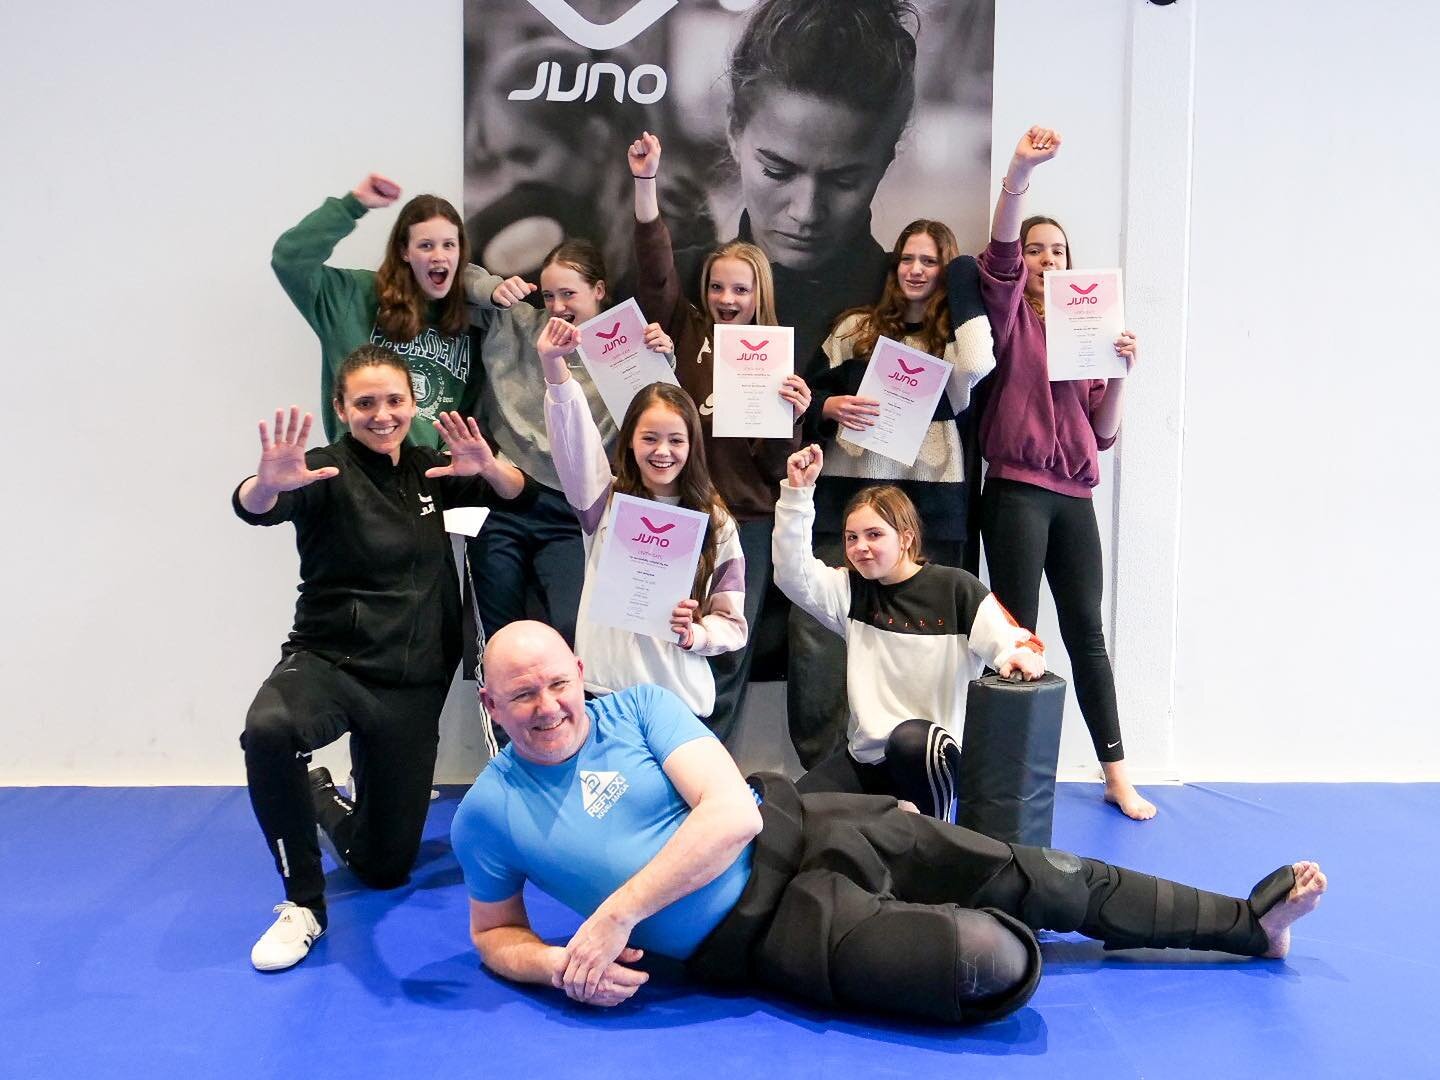 Huge congrats to our 3 JUNO classes who successfully completed their exams last night! JUNO Girls, JUNO Intermediate and Basics 👌👏👏#strongerthanyouthink #womenempowerment #utrecht